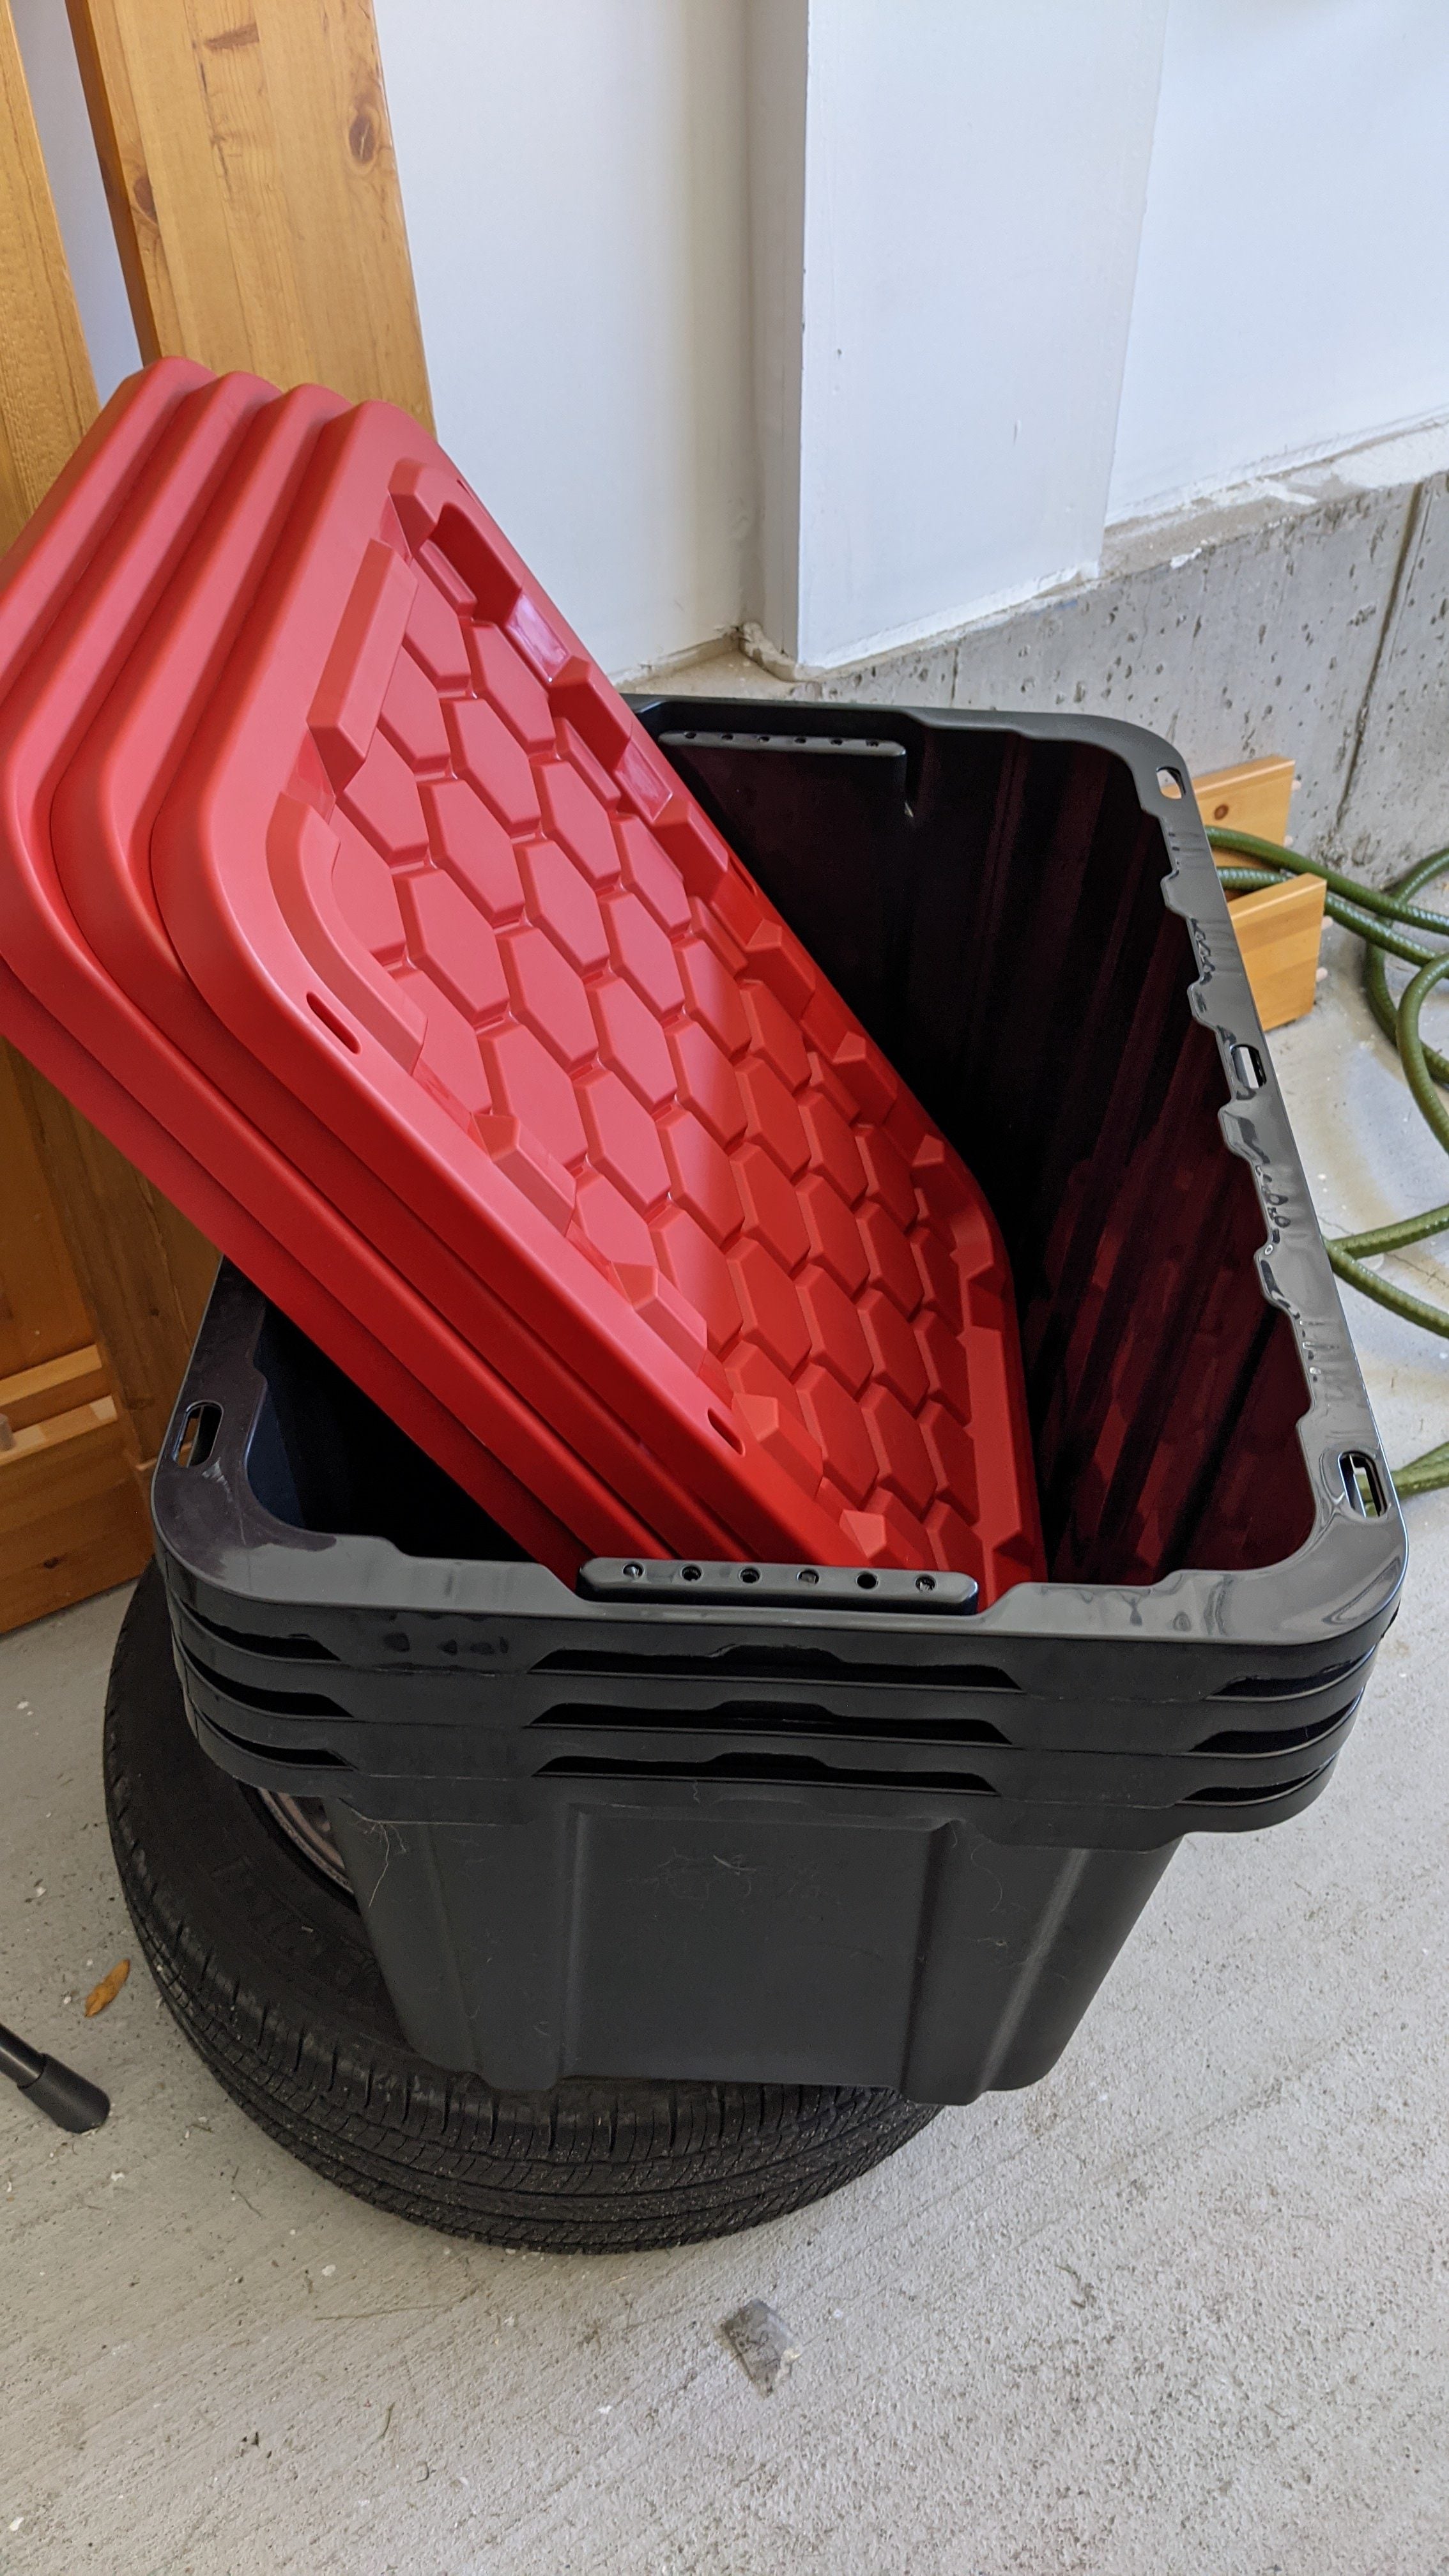 Rubbermaid Roughneck Storage Tote Red - 18 Gallon. #12